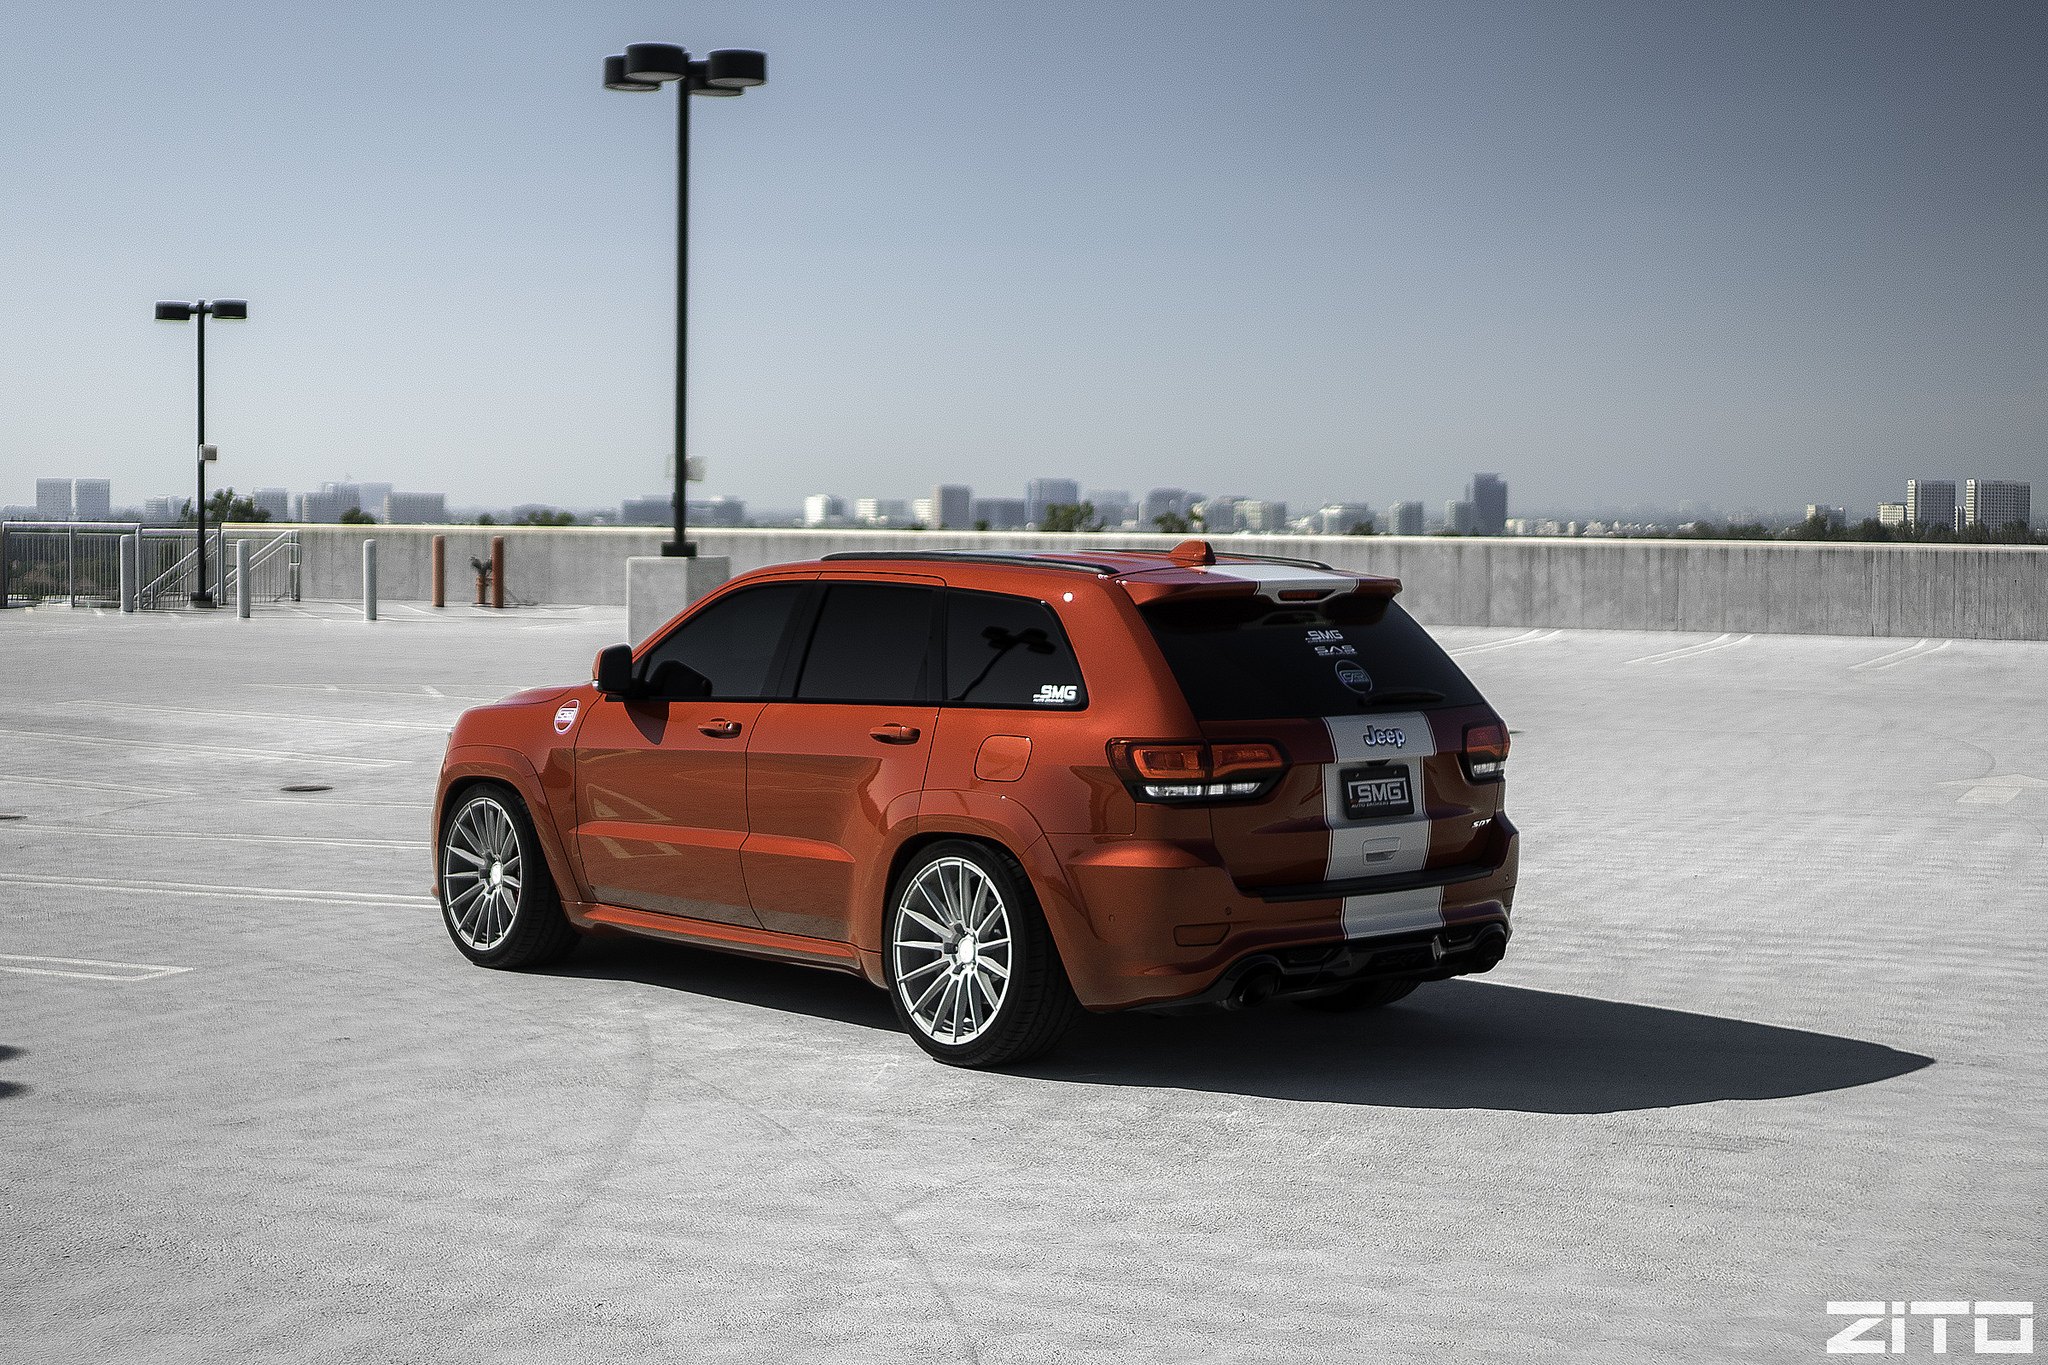 Roofline Spoiler with Light on Orange Jeep Grand Cherokee - Photo by Zito Wheels